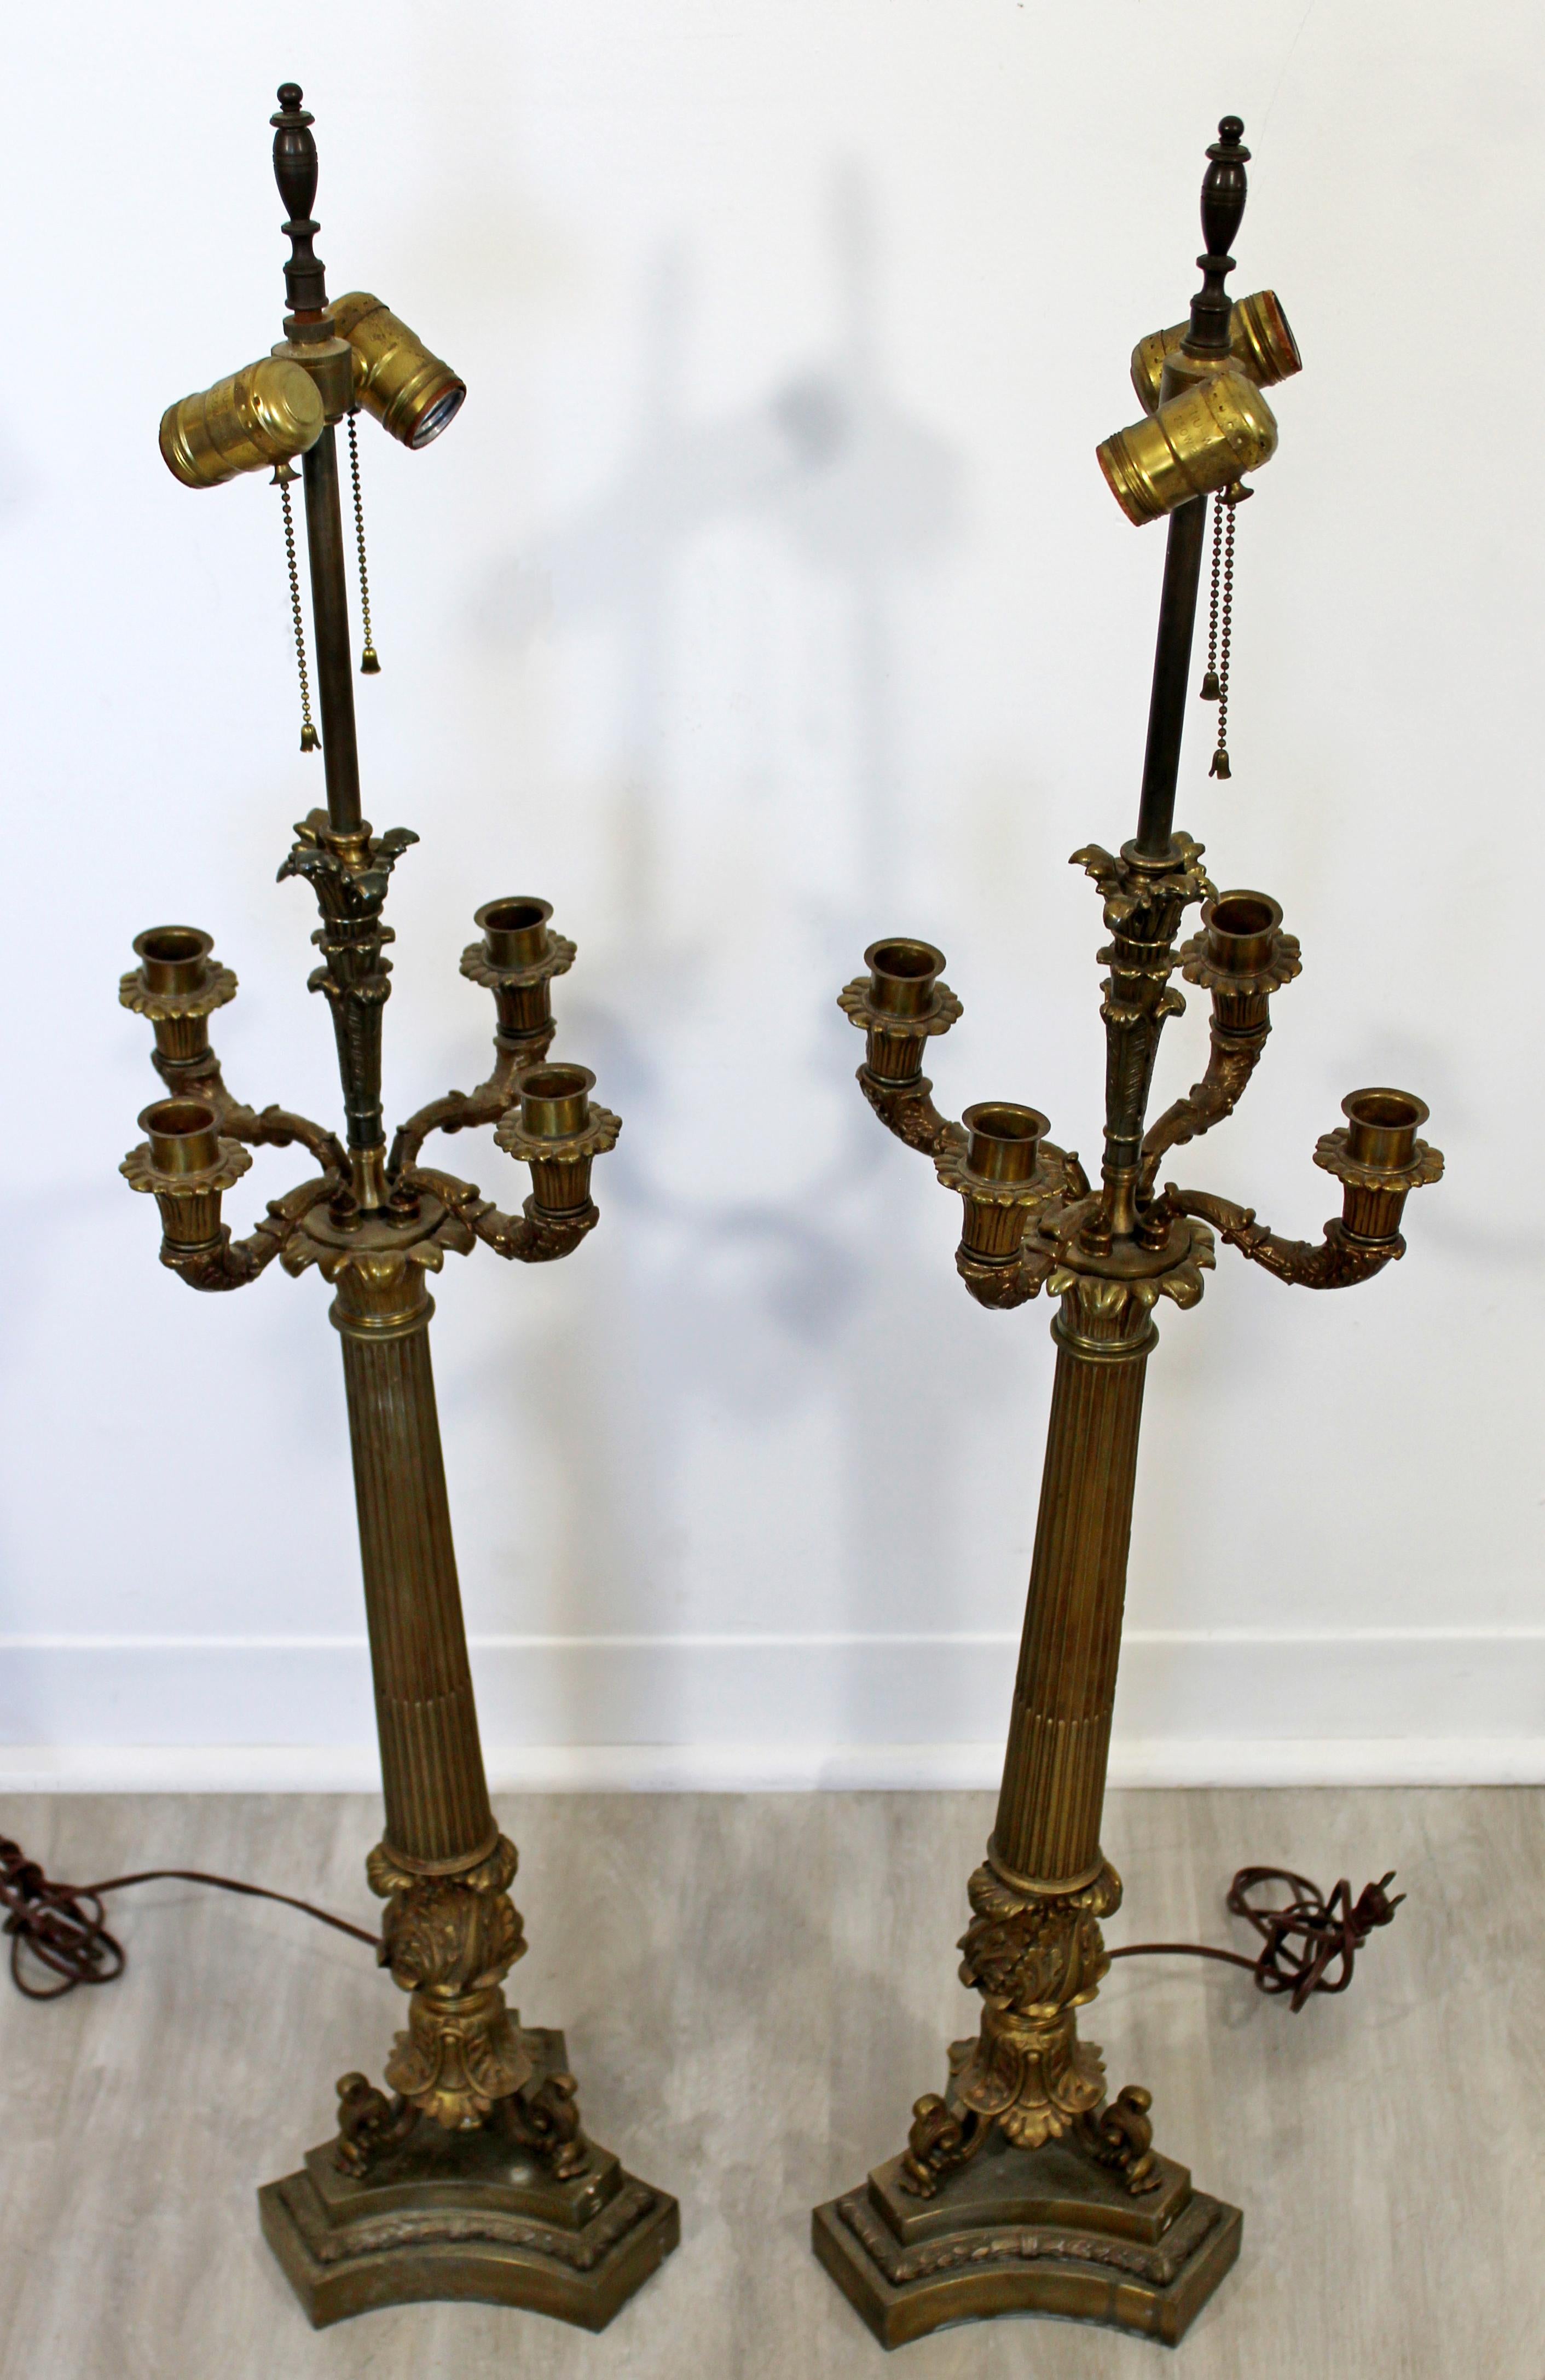 Art Deco Neoclassical Pair of William Kessler Bronze Table Lamps, 1930s In Good Condition For Sale In Keego Harbor, MI